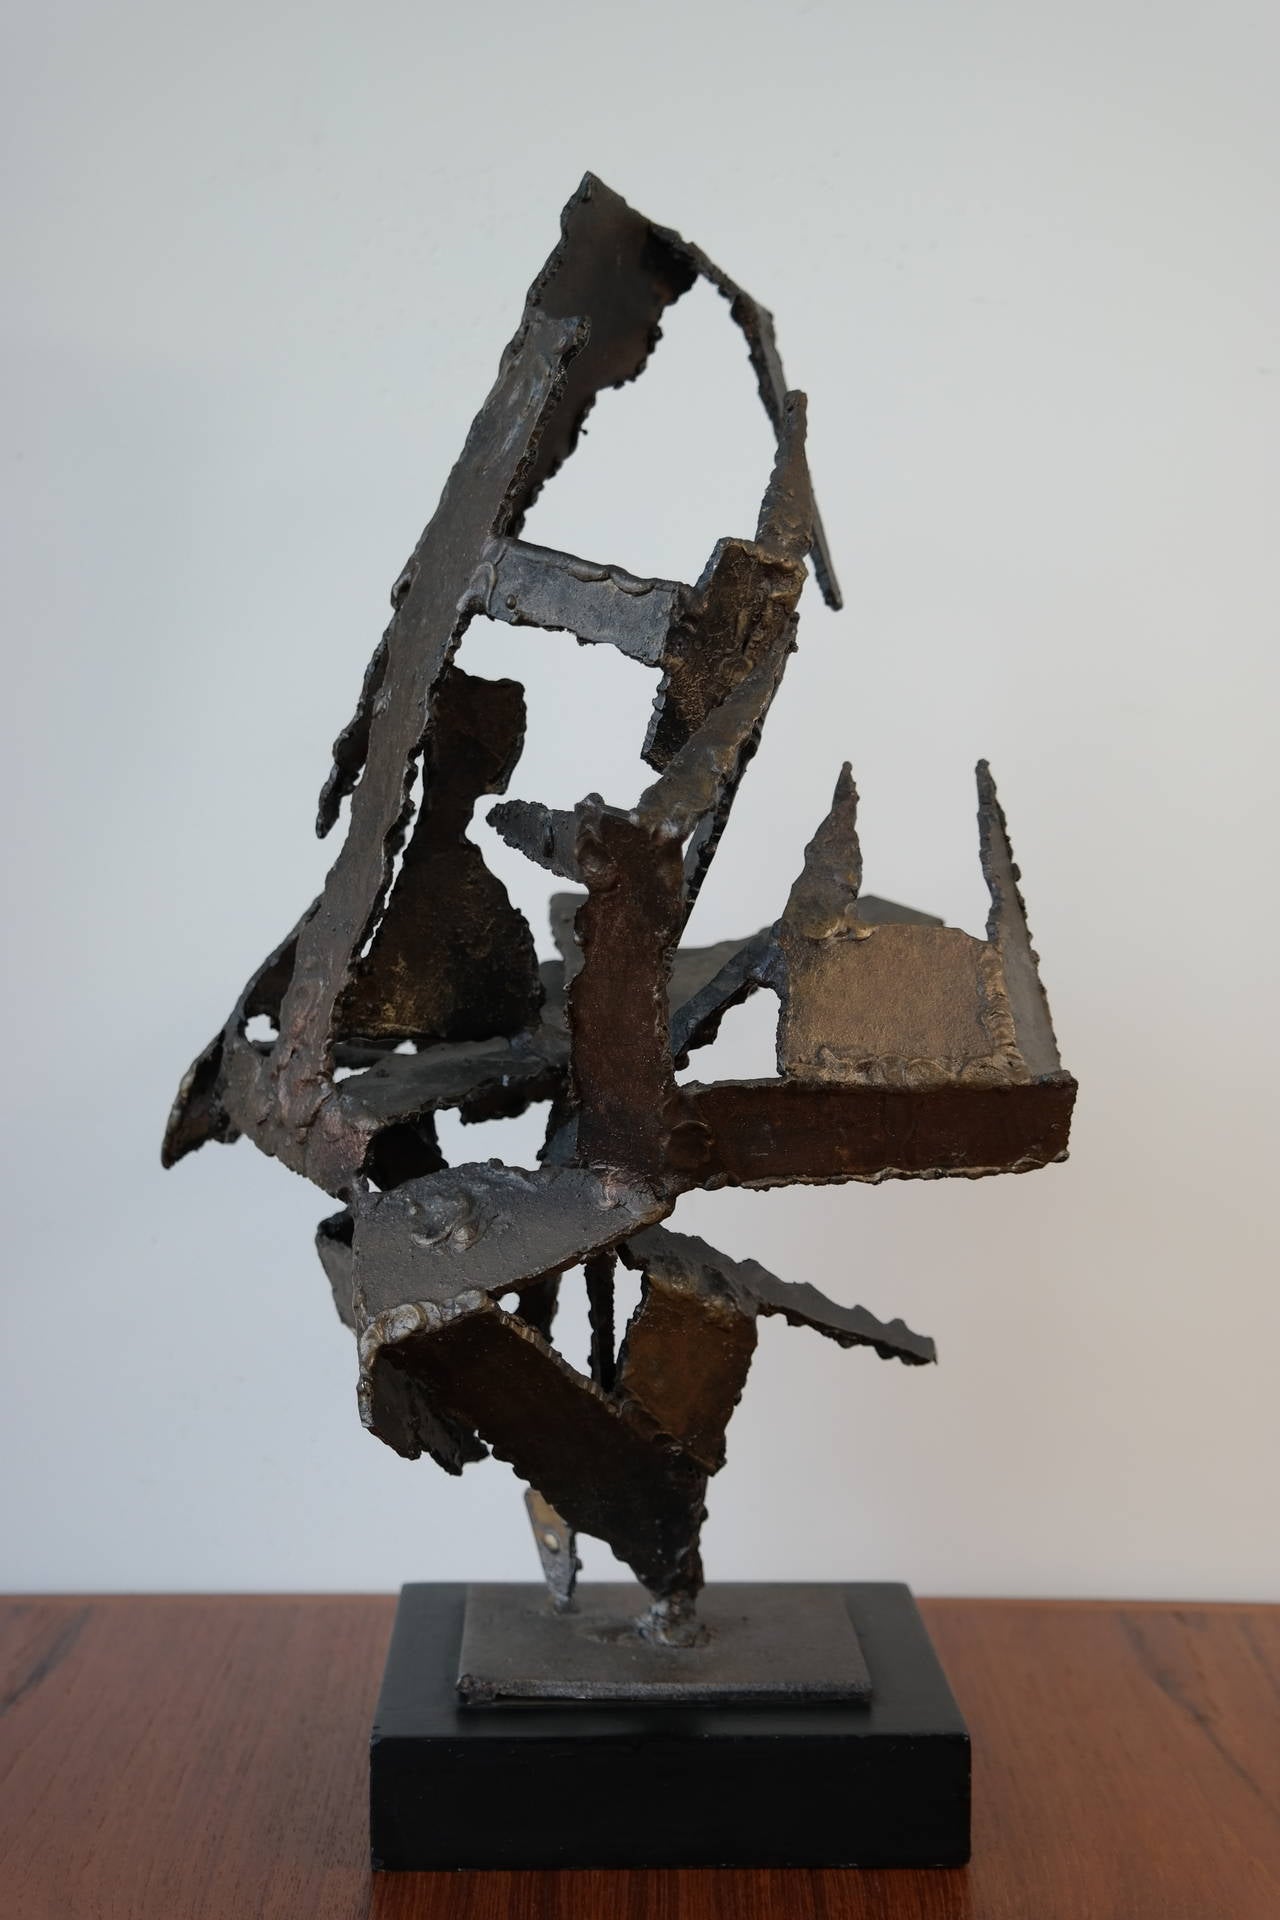 Impressive brutal sculpture mounted on an ebonized wood base. A very decorative piece of art that goes well in any décor, made of individual torch cut pieces of metal welded together to make this impressive sculpture. Shows some signs of wear with